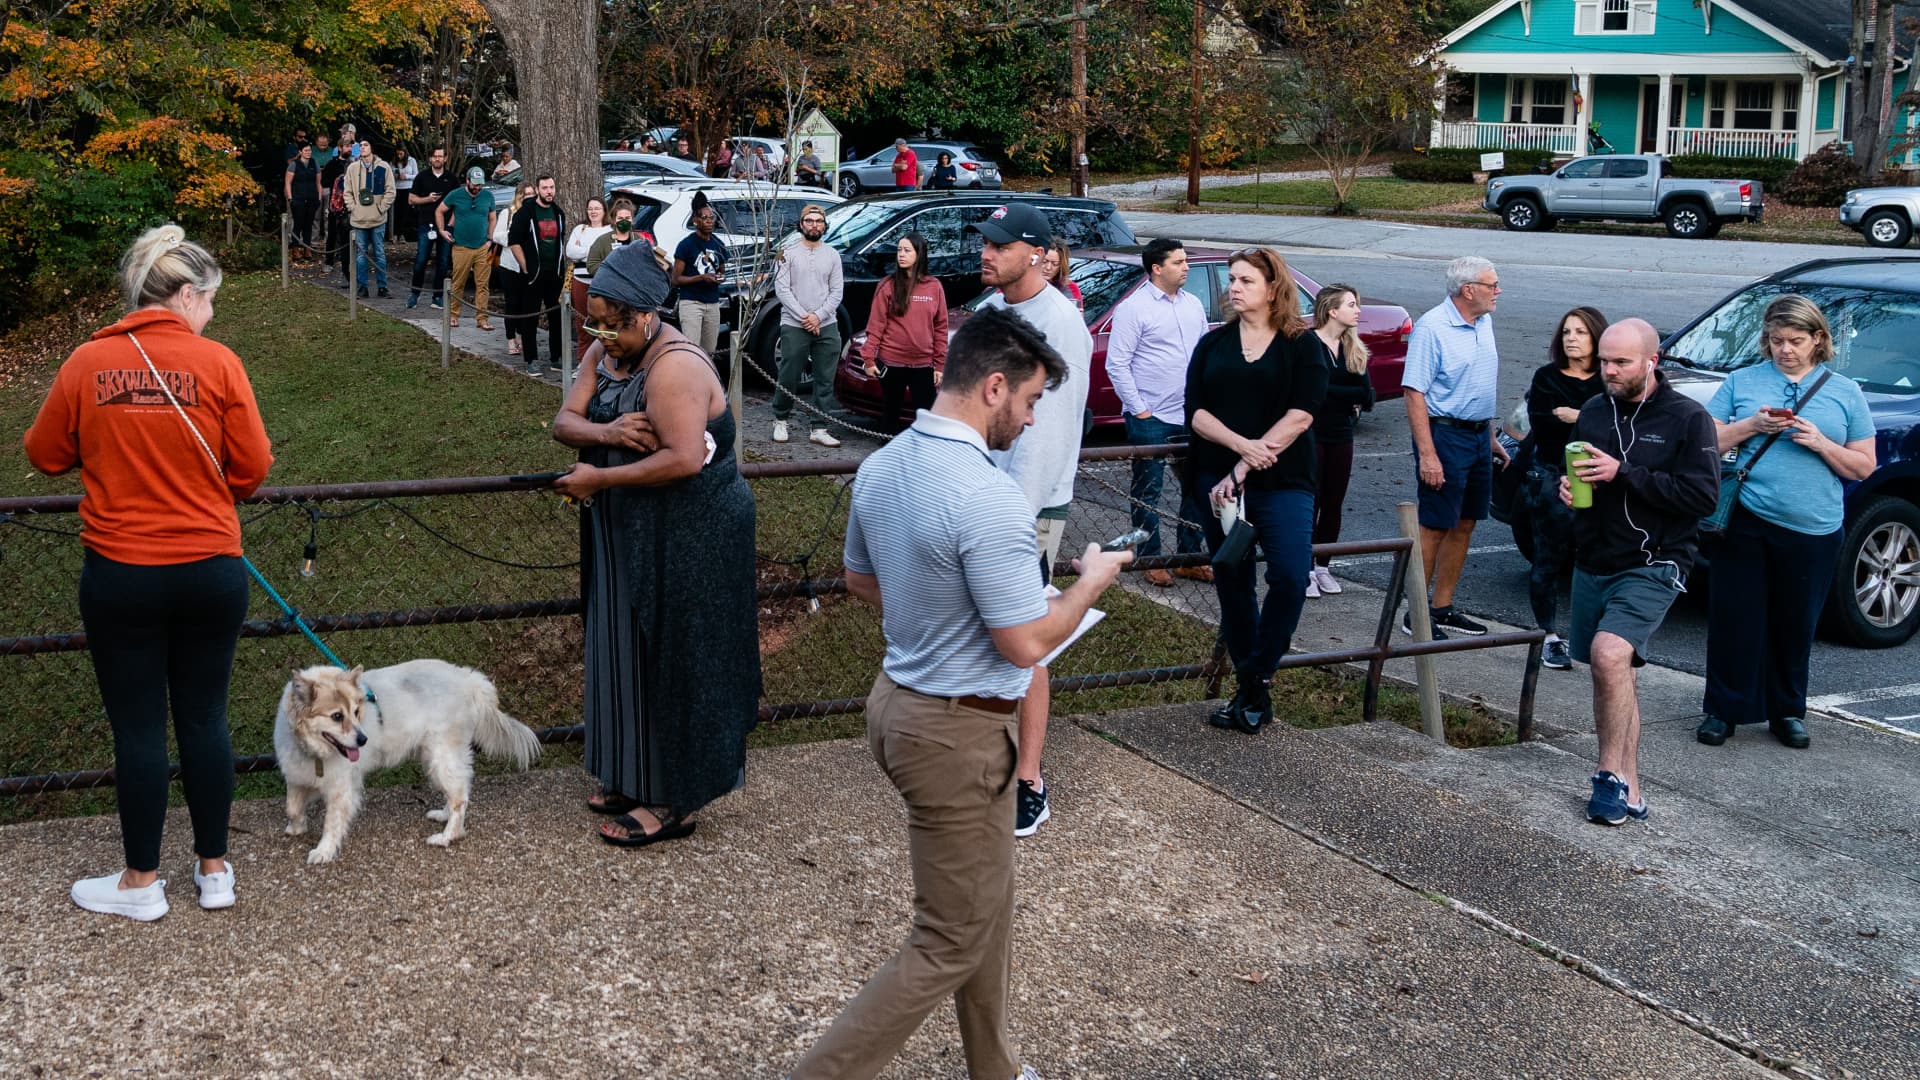 Voters in line to cast ballots at a polling location in Atlanta, Georgia, US, on Tuesday, Nov. 8, 2022.